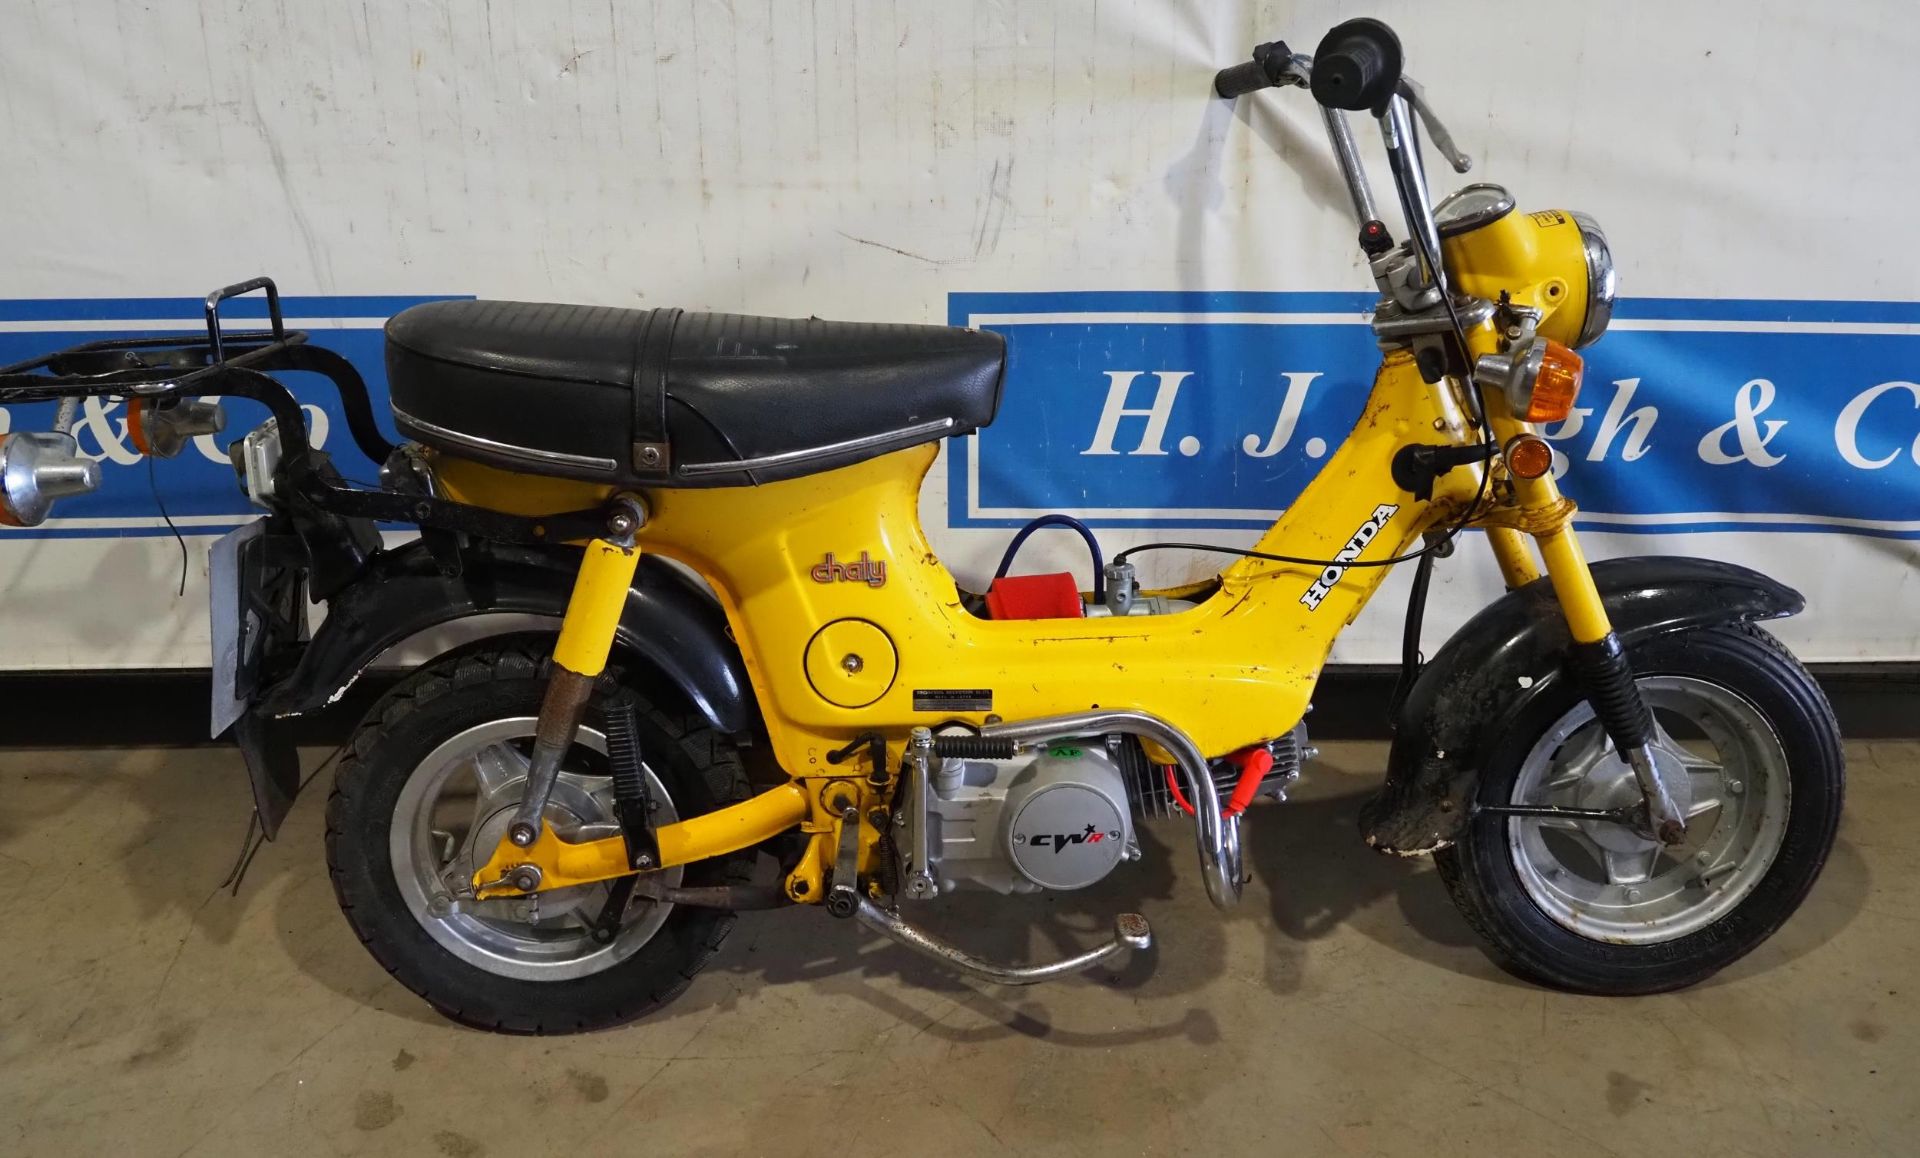 Honda Chaly moped with CWR engine. 125cc. Engine turns over with compression. Reg. KAN 524P.